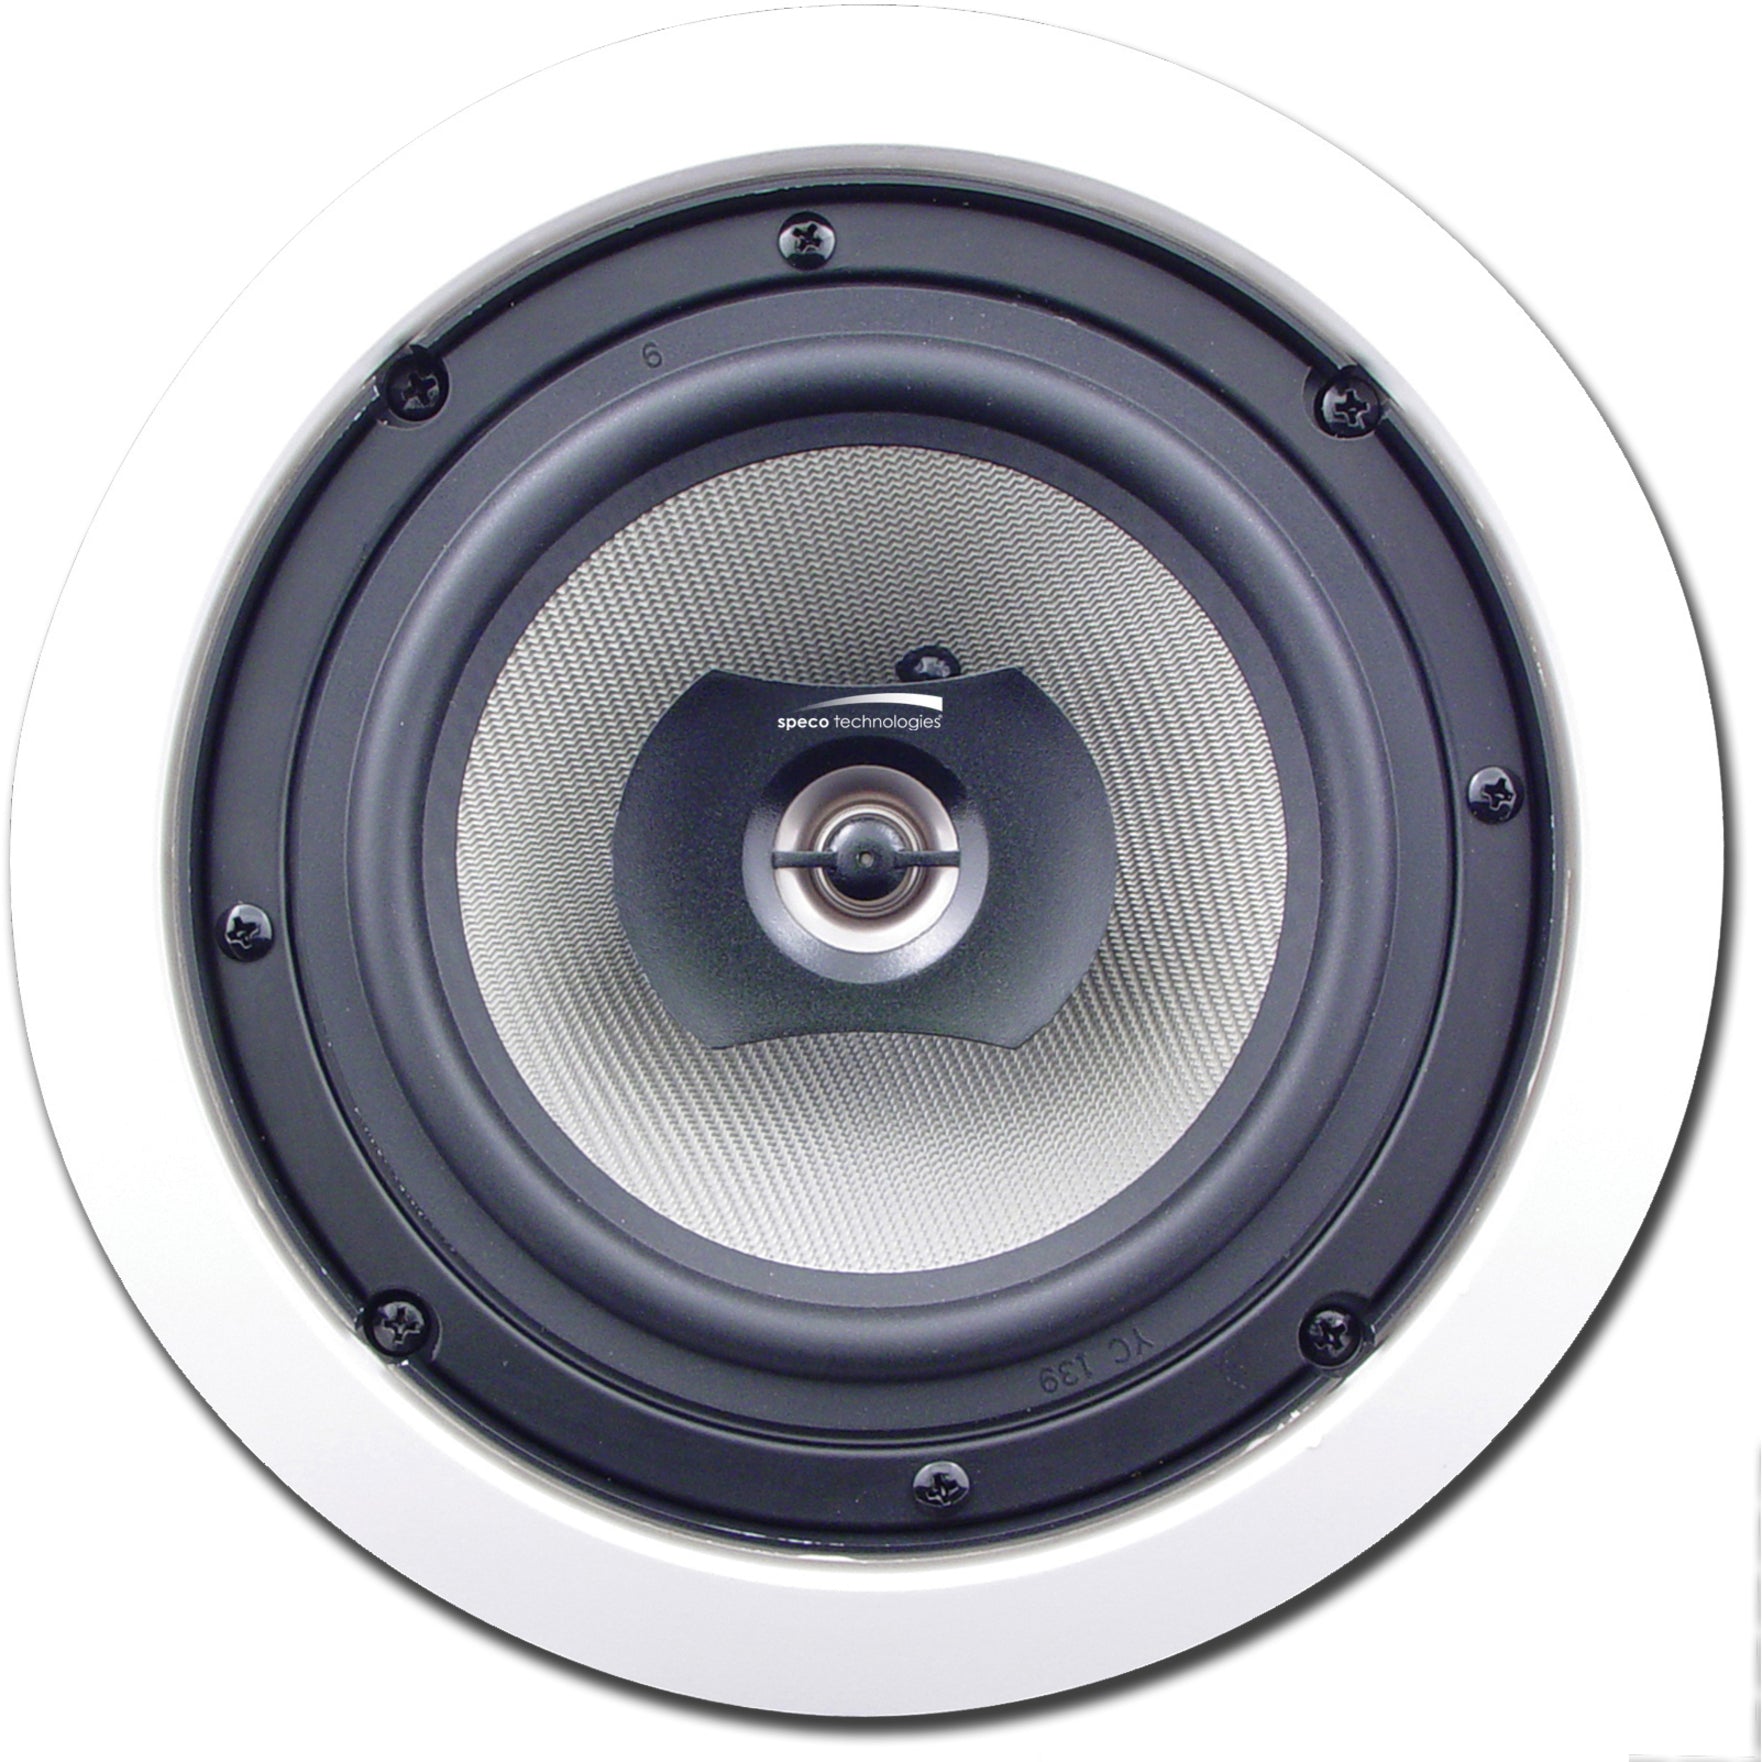 Speco SP-CBC6 Custom Builder 2-way Ceiling Mountable Speaker, Integrated C-Clamp Mounting System, 7 1/2" Mounting Diameter